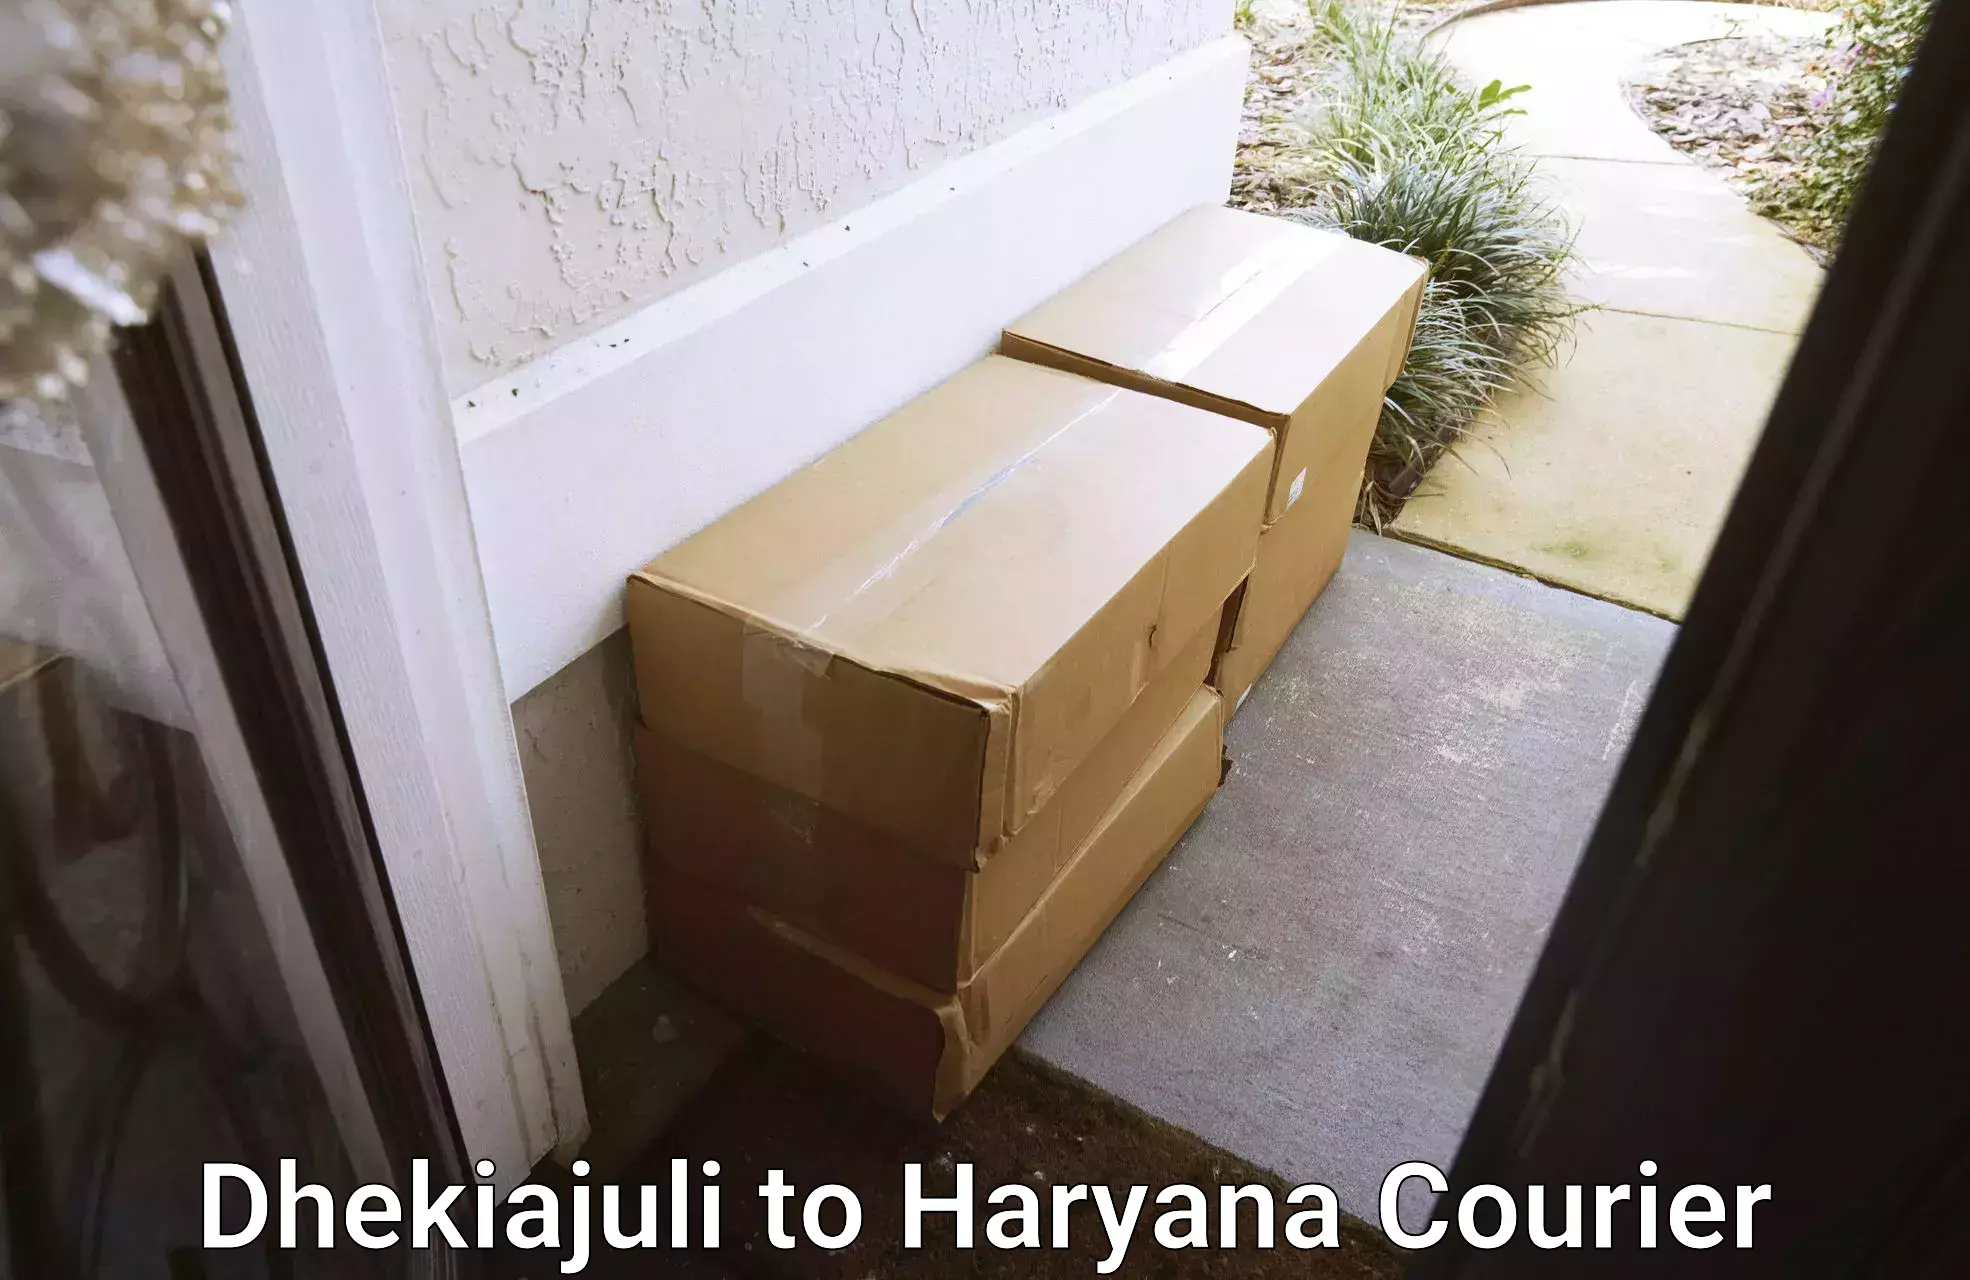 Round-the-clock parcel delivery Dhekiajuli to Bhuna